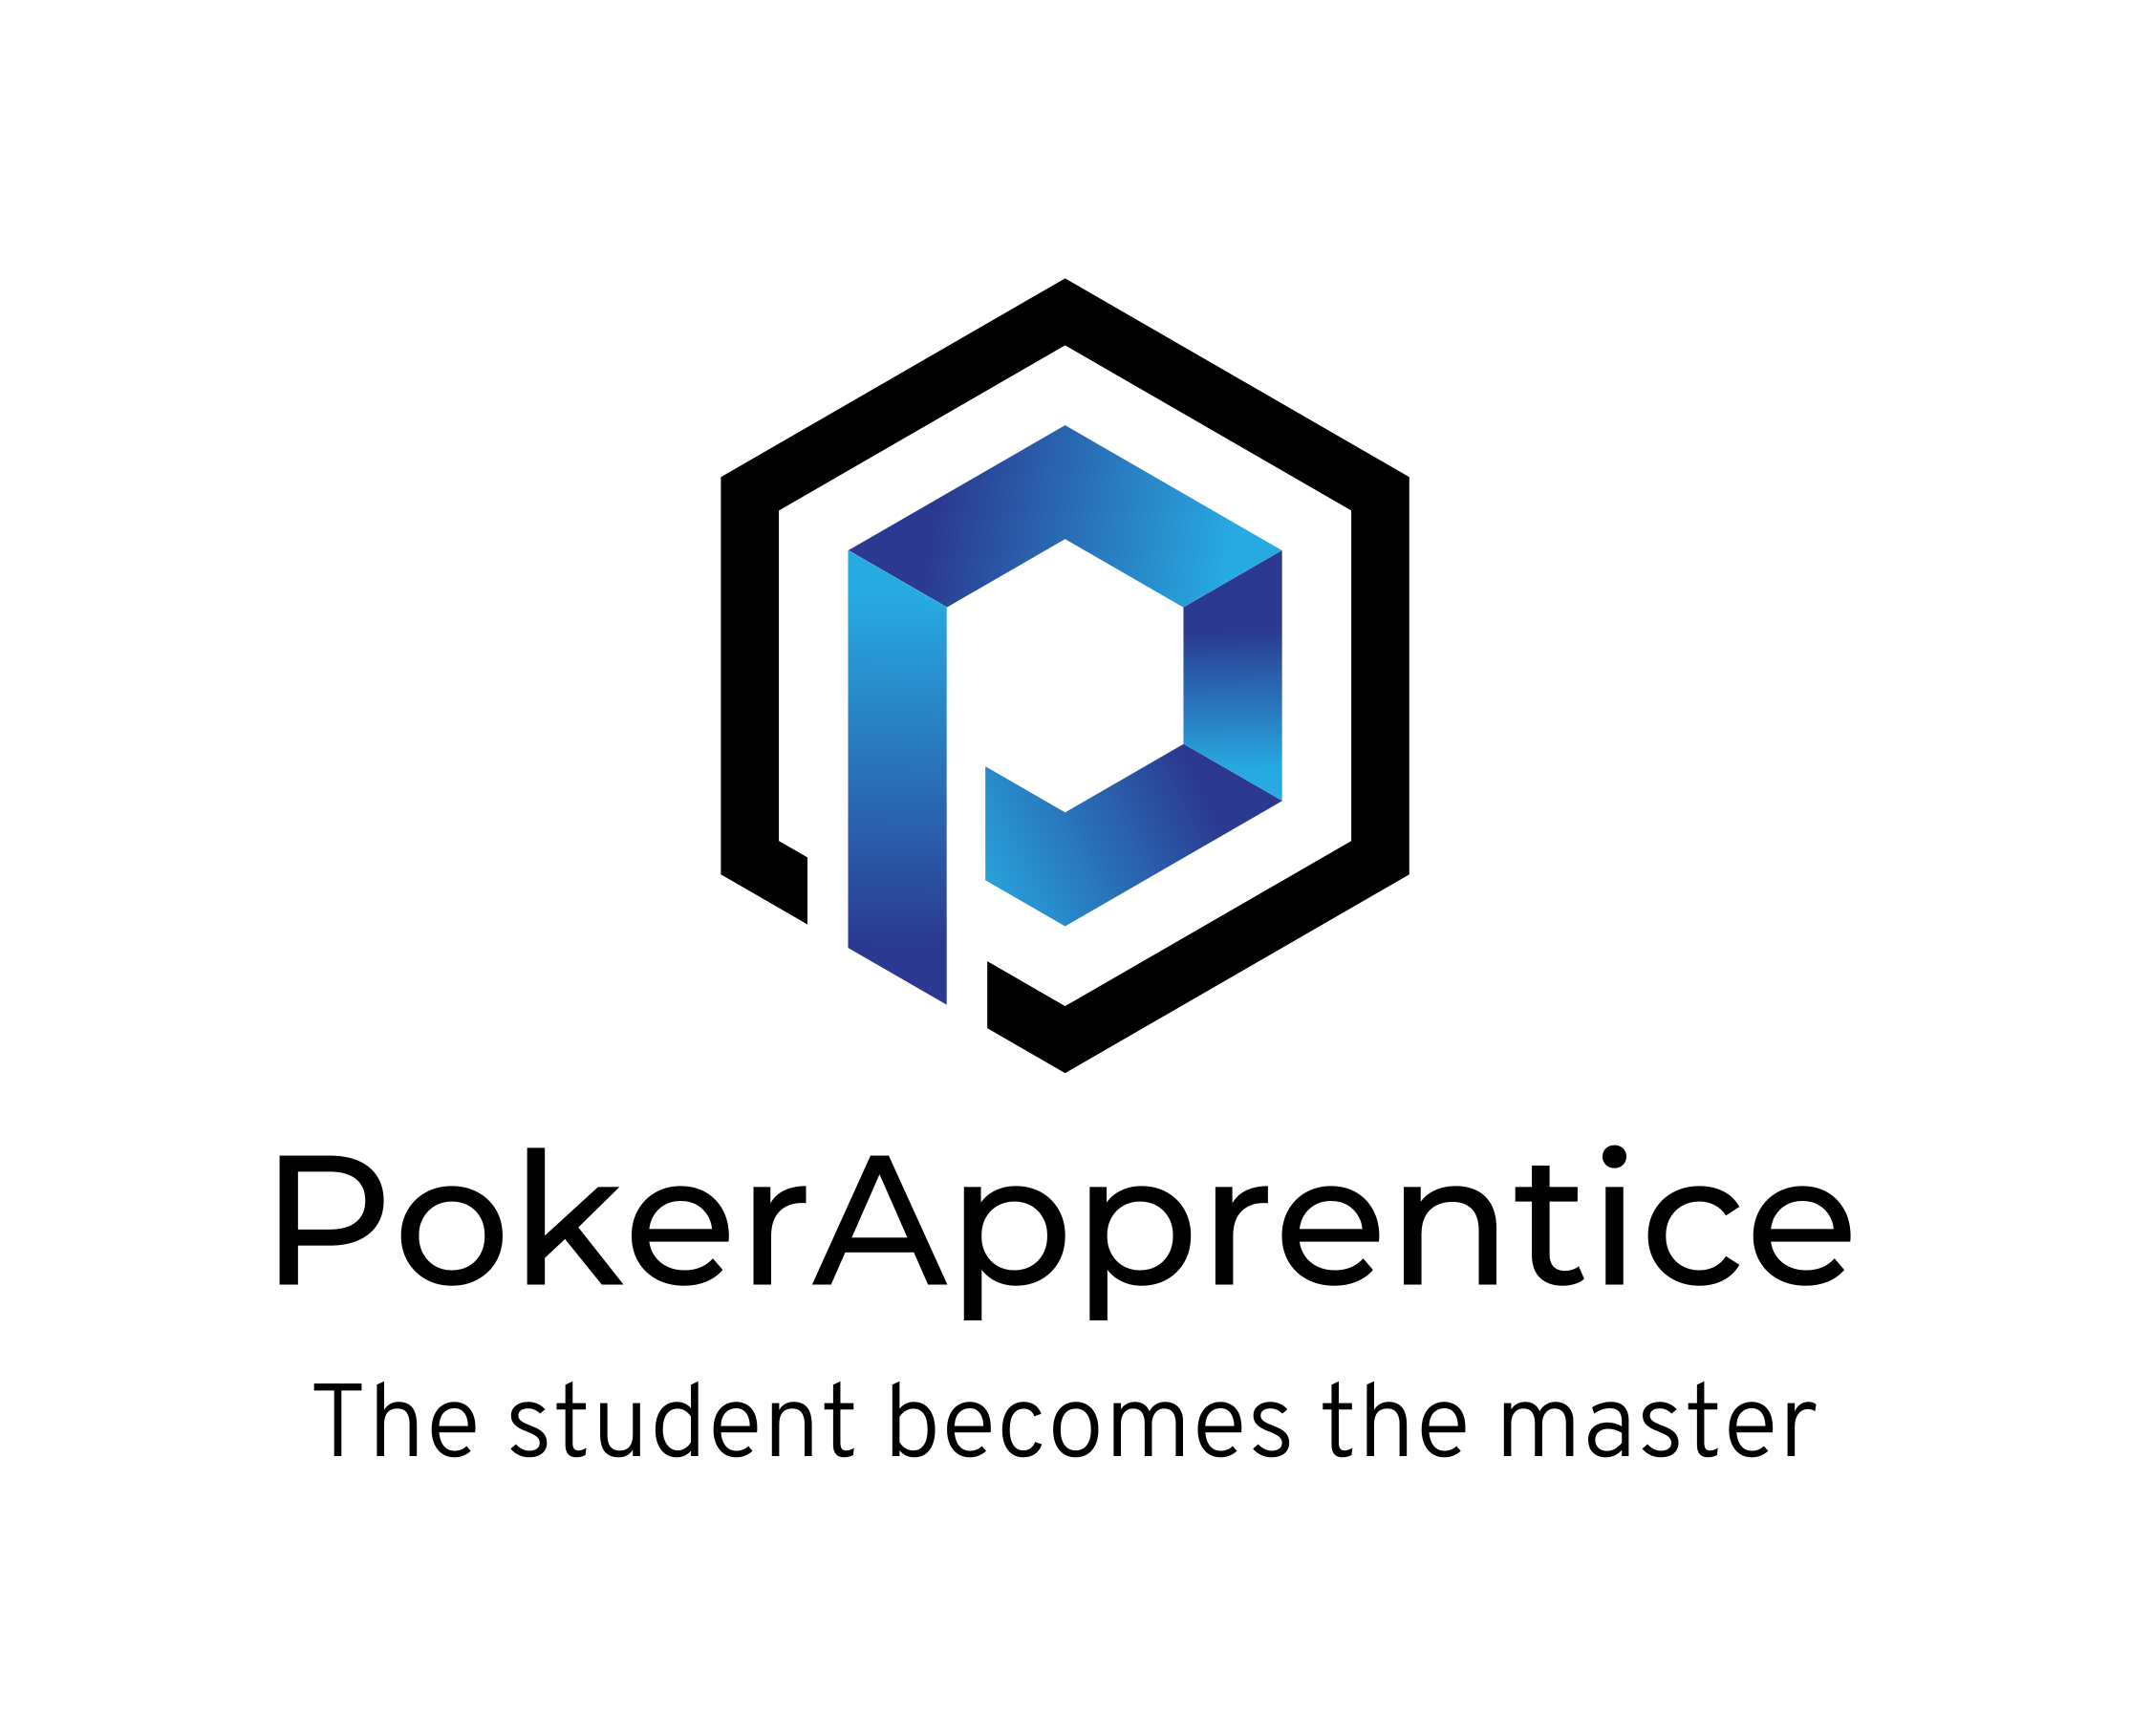 PokerApprentice - The student becomes the master